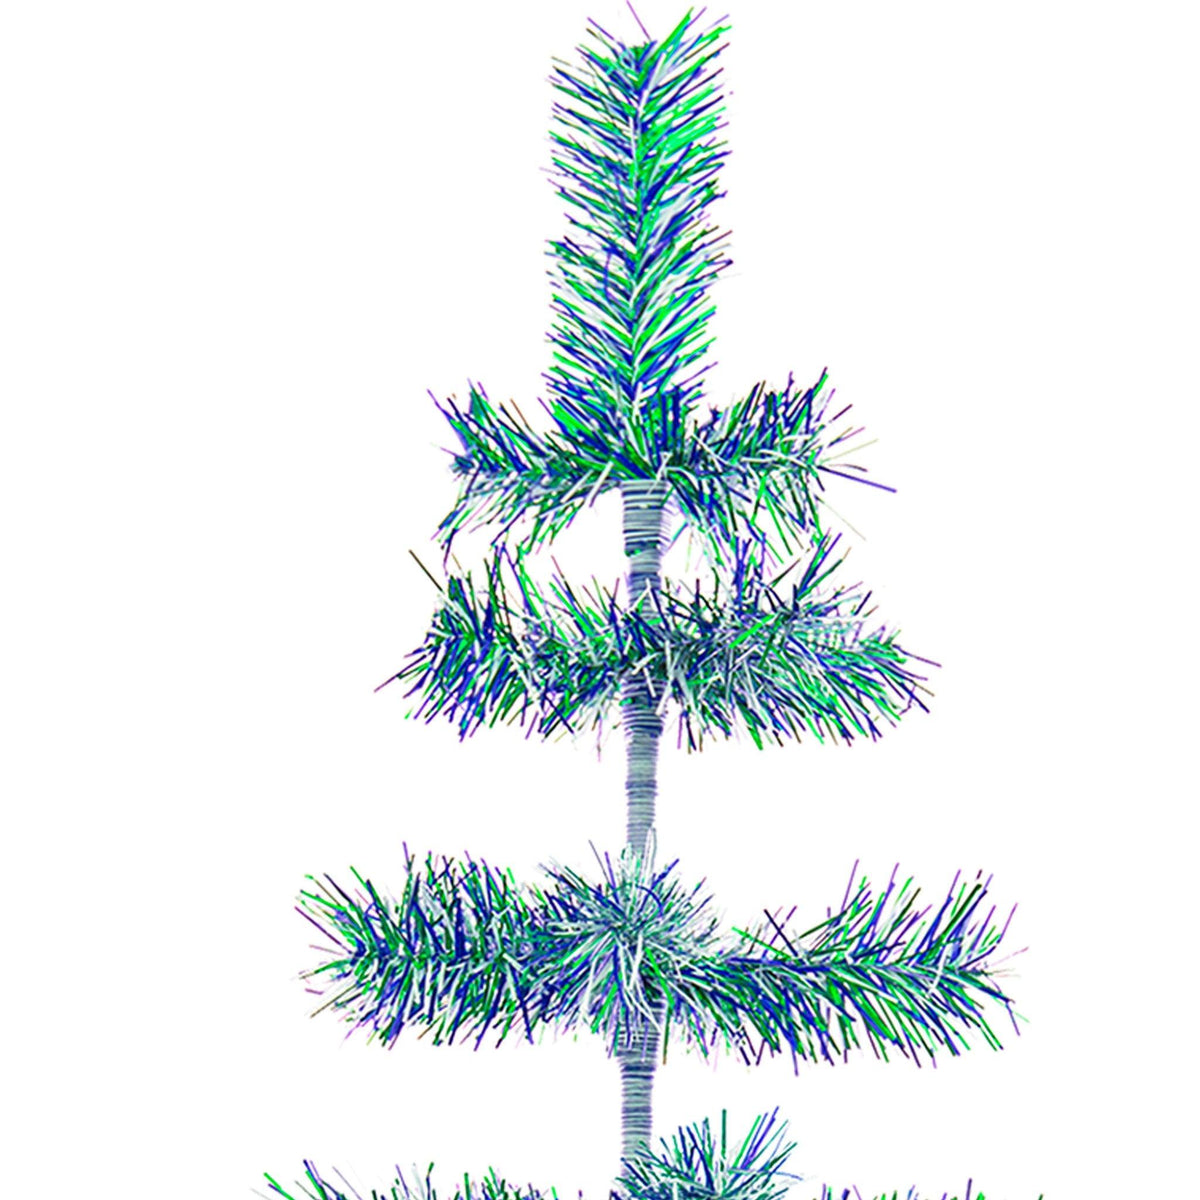 Earth Day-themed Multicolor Christmas Trees made by hand in the USA!  Decorate your holidays with a classic Tinsel Christmas Tree on sale at leedisplay.com